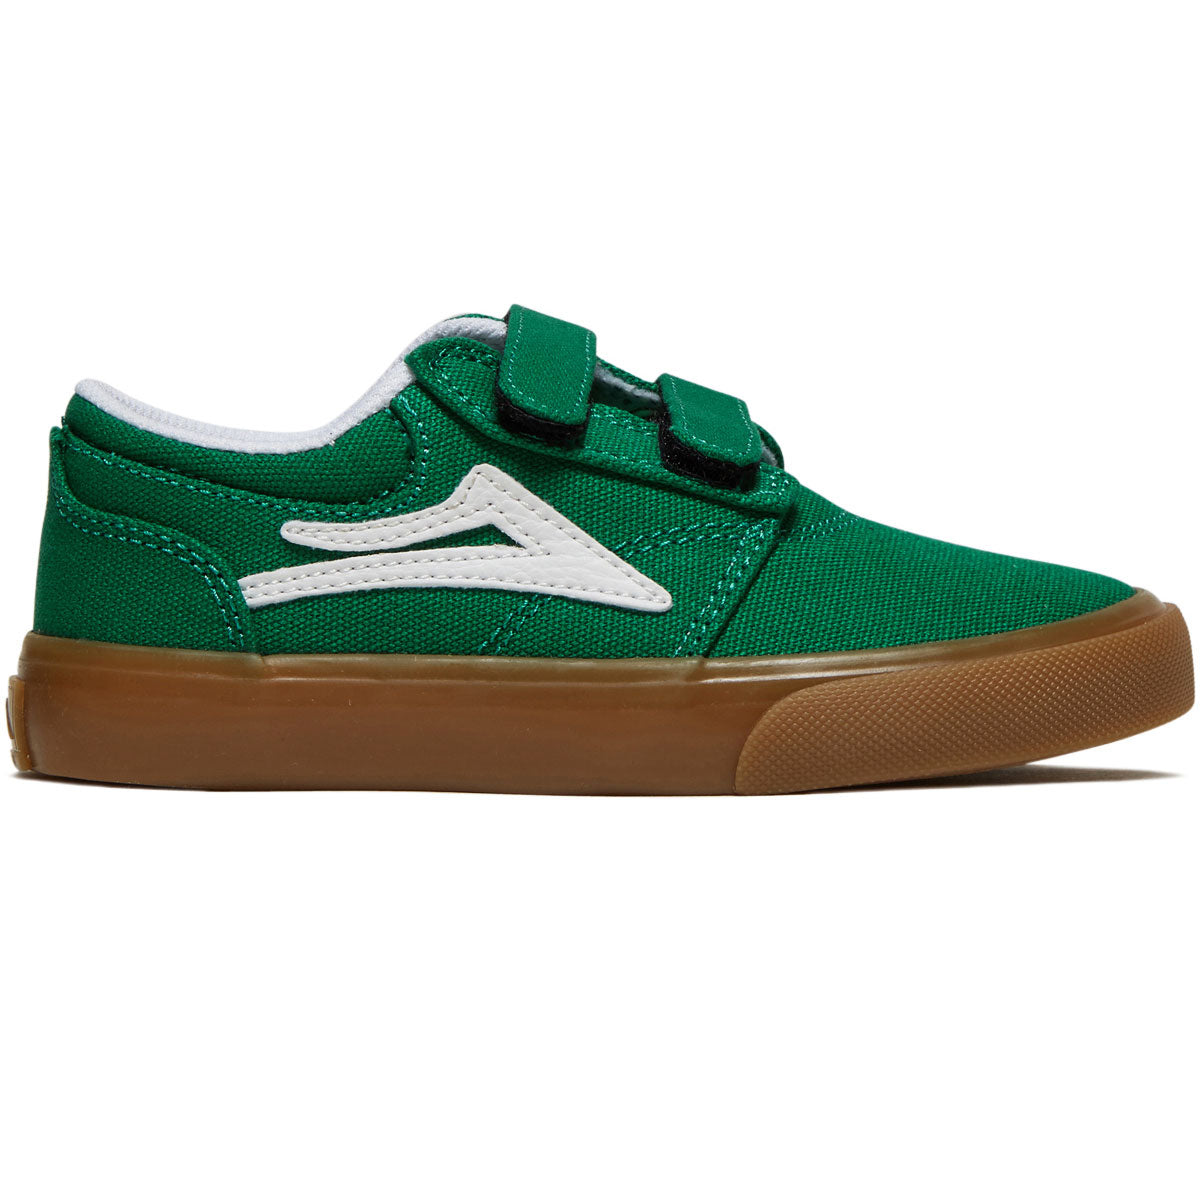 Lakai Youth Griffin Shoes - Green/Gum Canvas image 1